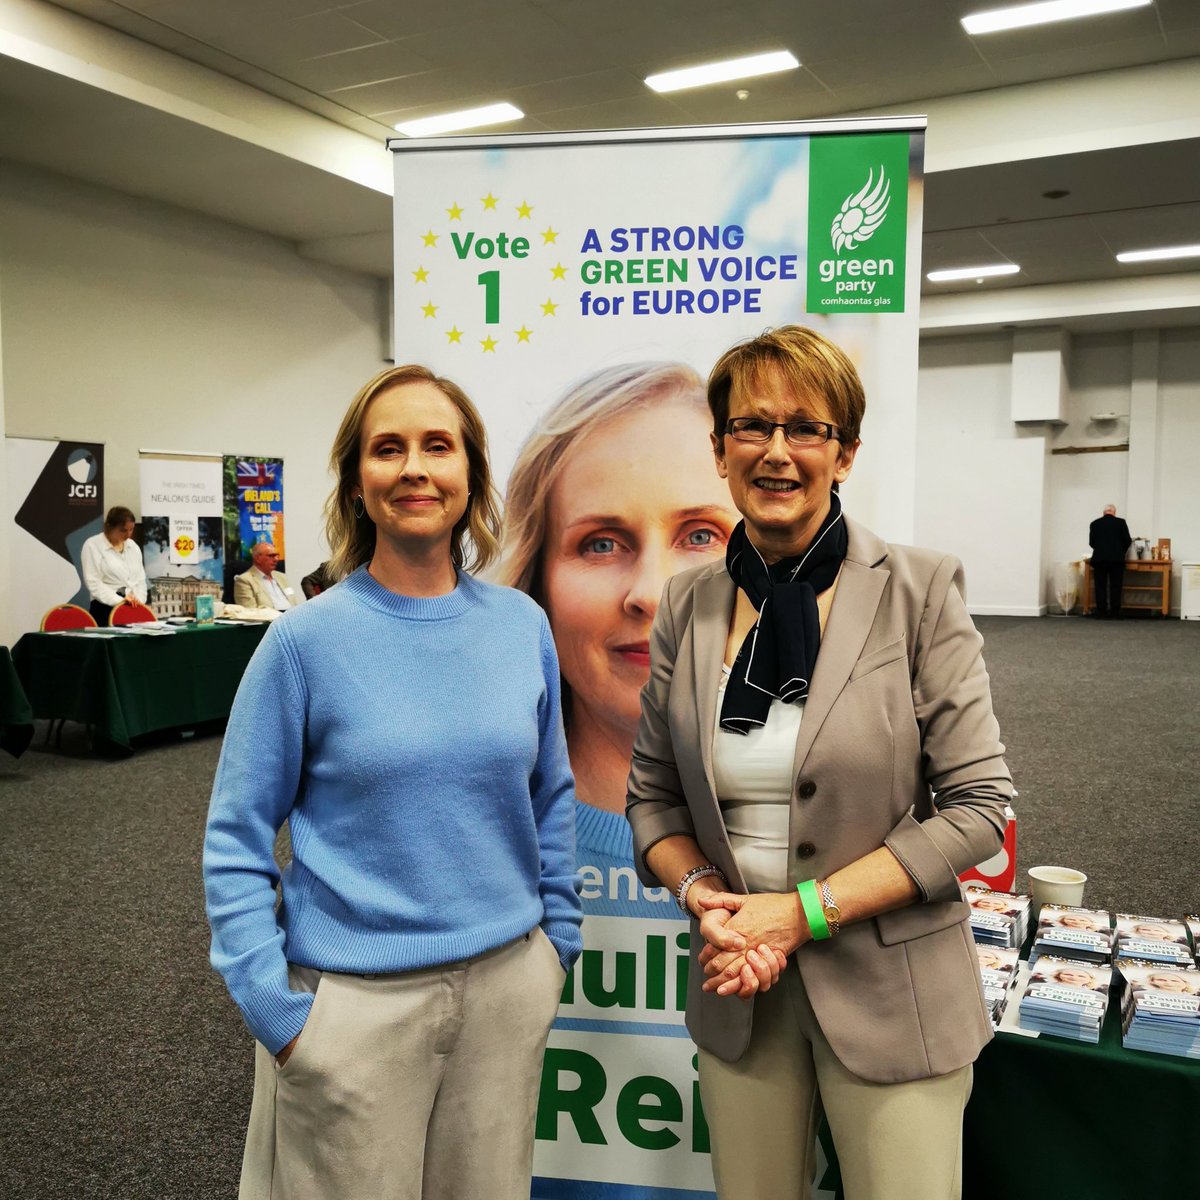 Looking forward to supporting @paulinegalway for Europe during our #Kildare canvass. @greenparty_ie have a top class line up for Europe working for People and Planet. #ChooseCourage